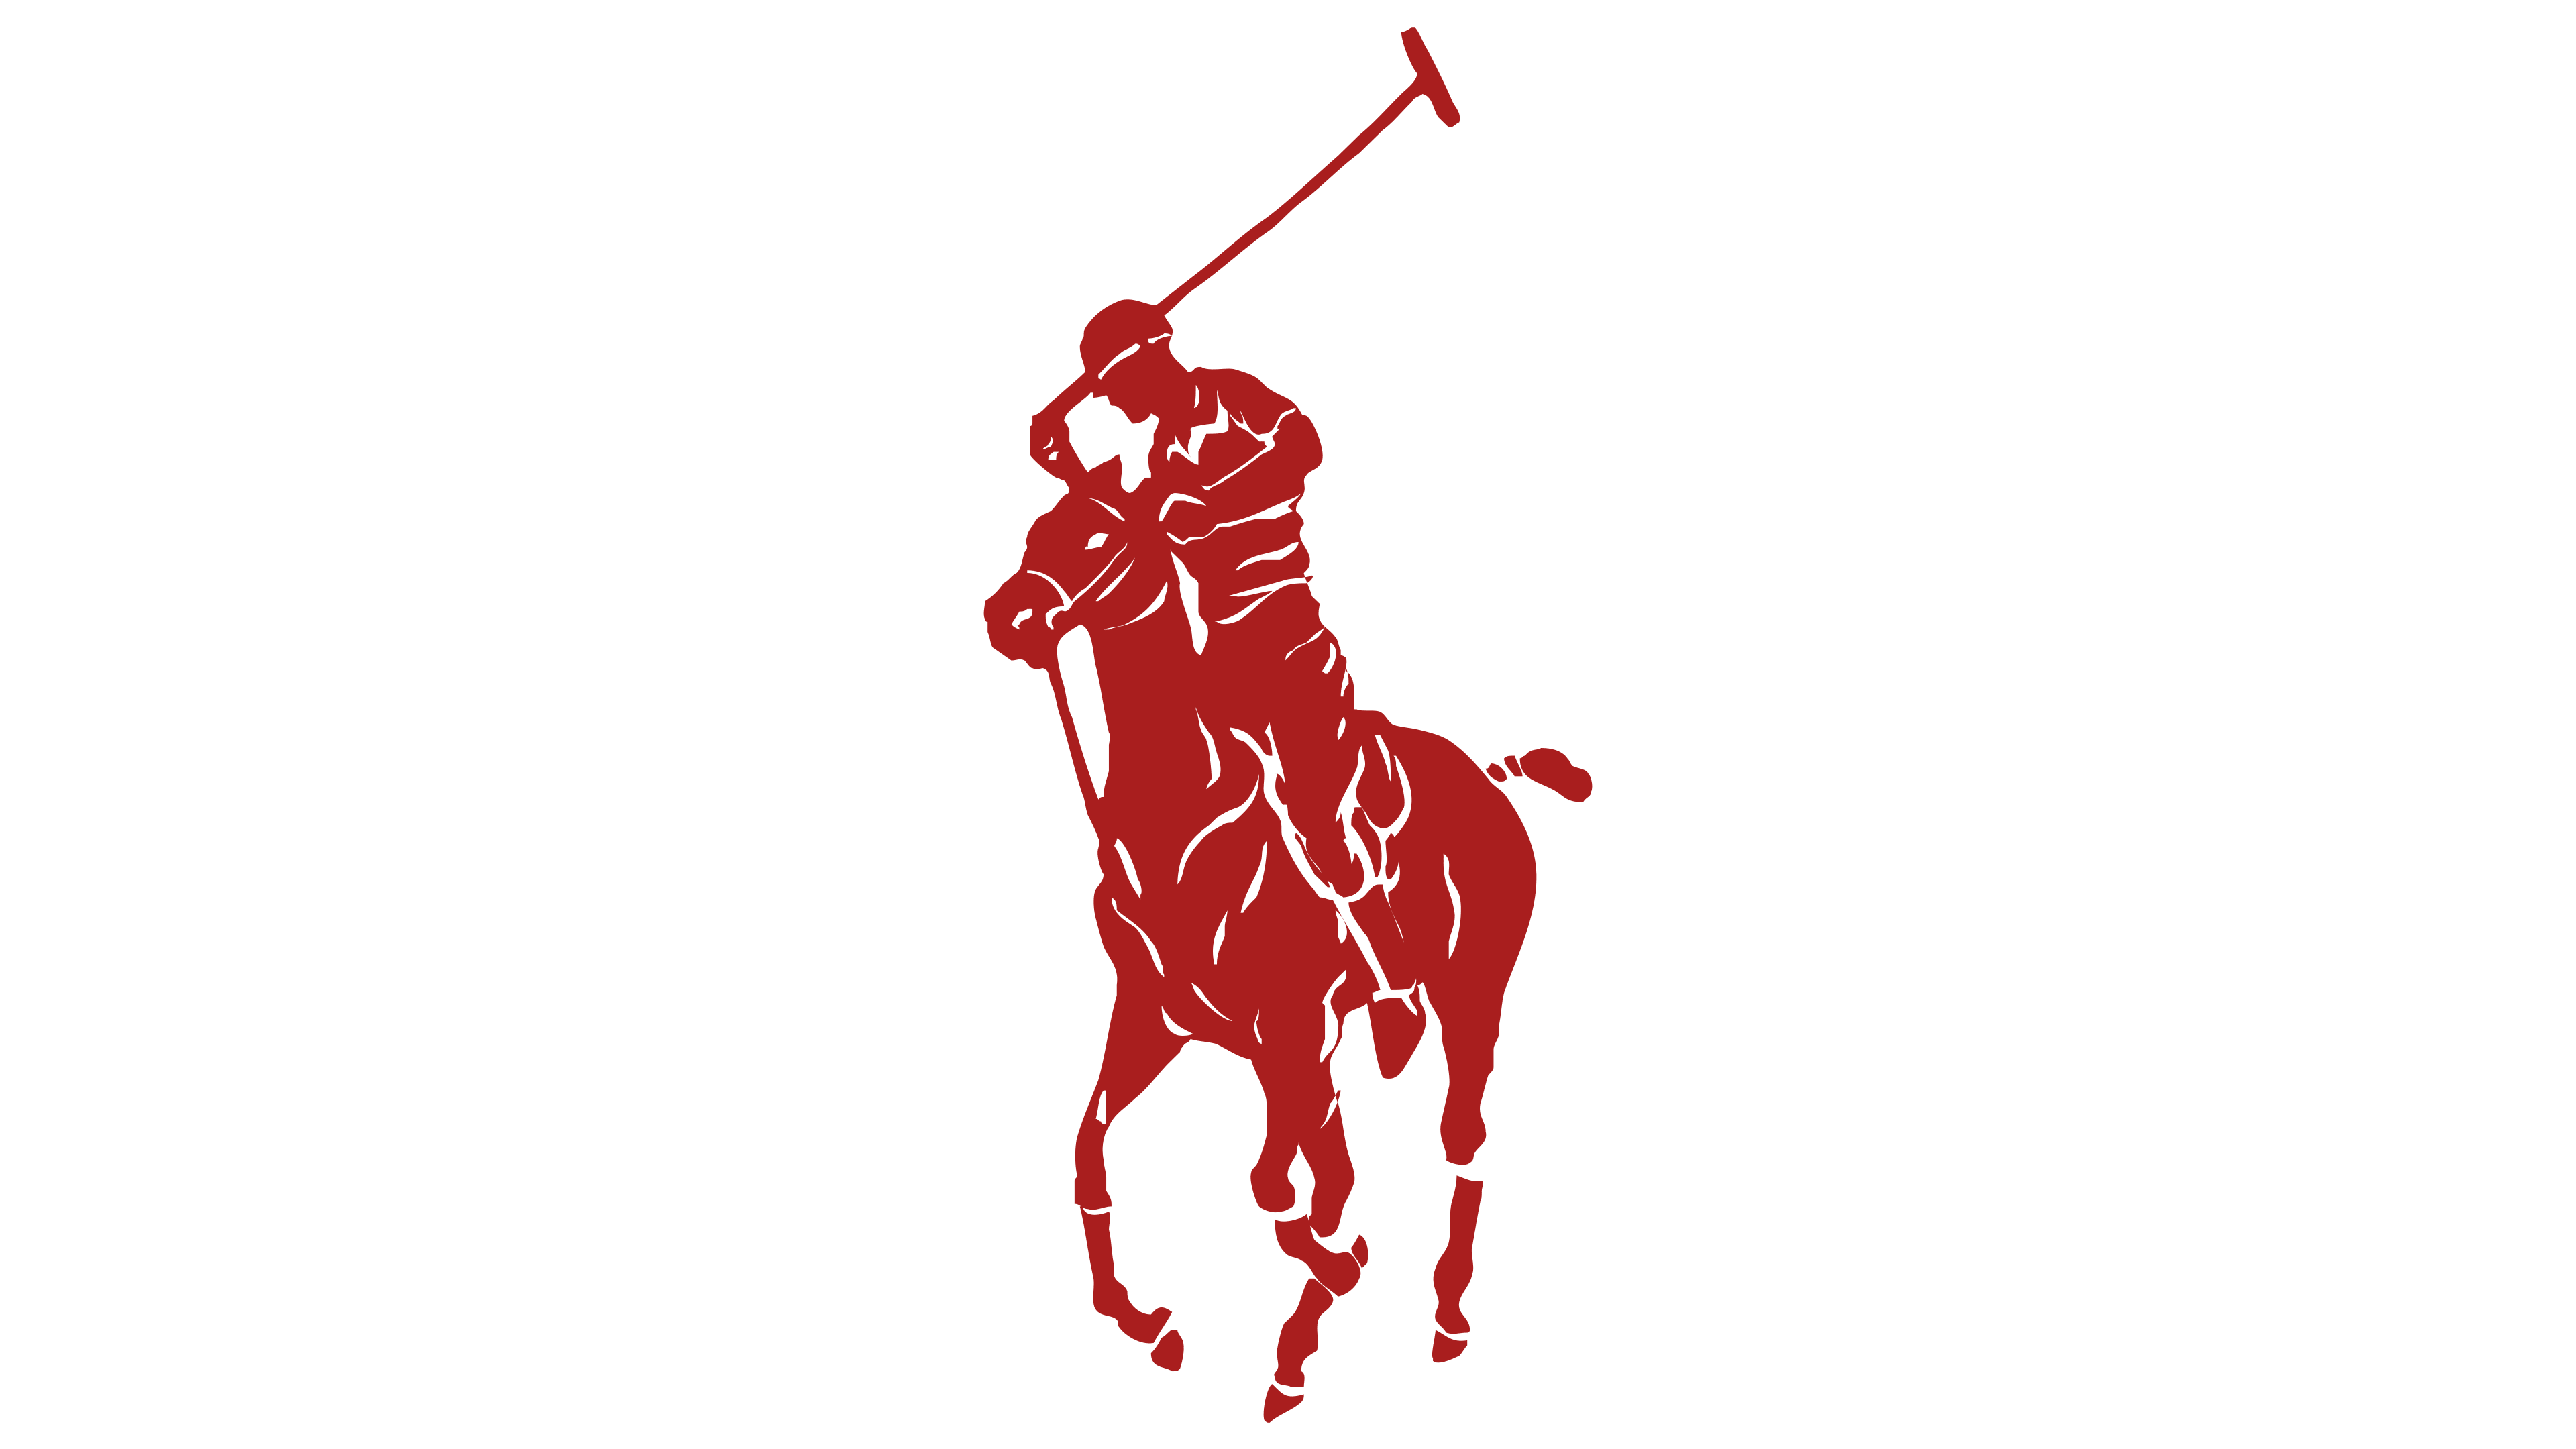 Ralph Lauren Logo And Symbol, Meaning, History, PNG, Brand | arnoticias.tv